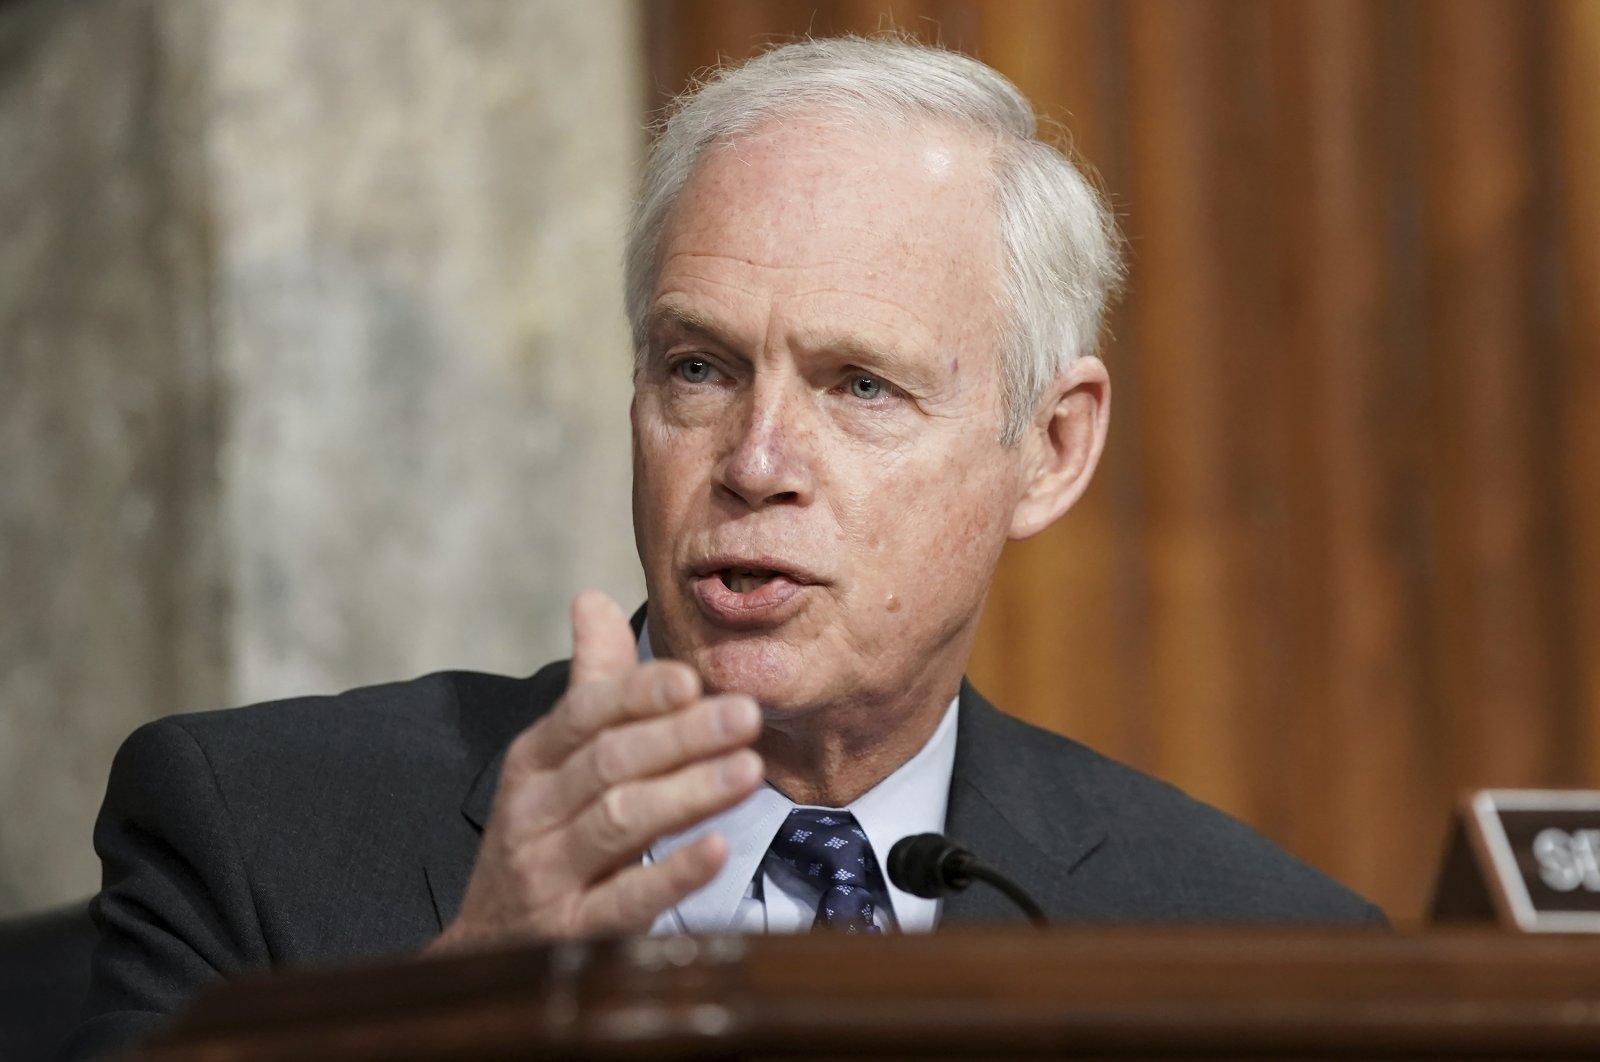 Republican Wisconsin Senator Ron Johnson, speaks during a joint hearing examining the Jan. 6, attack on the U.S. Capitol in Washington, March 3, 2021. (AP Photo)